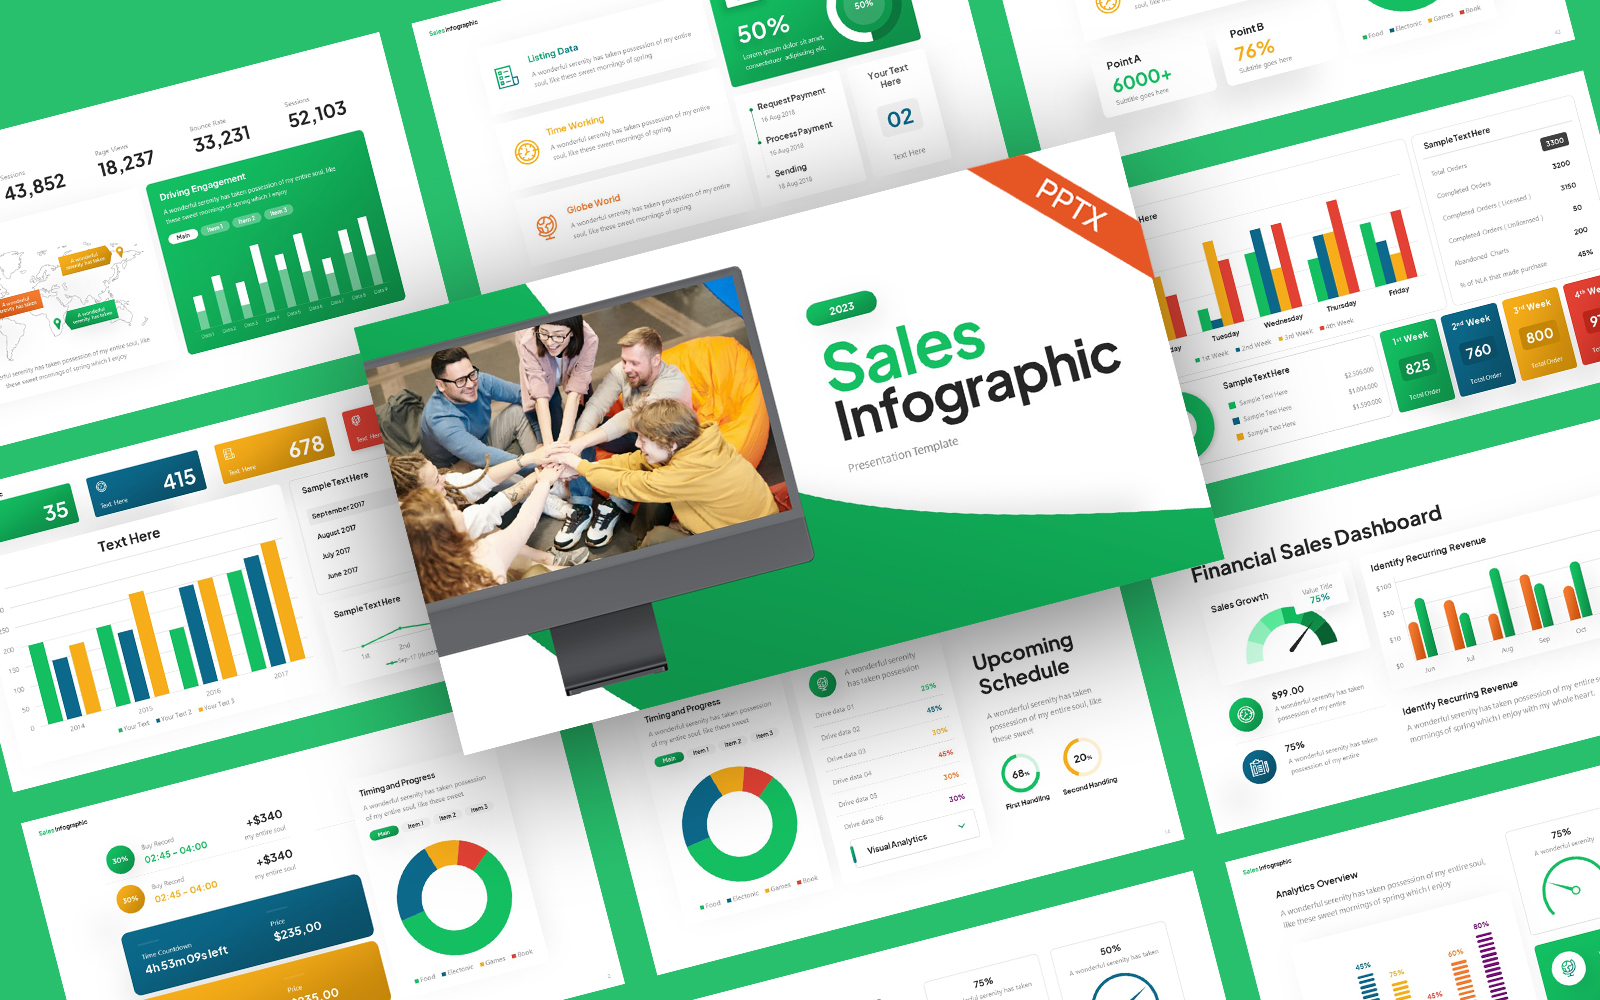 Sales Infographic Assets PowerPoint Template